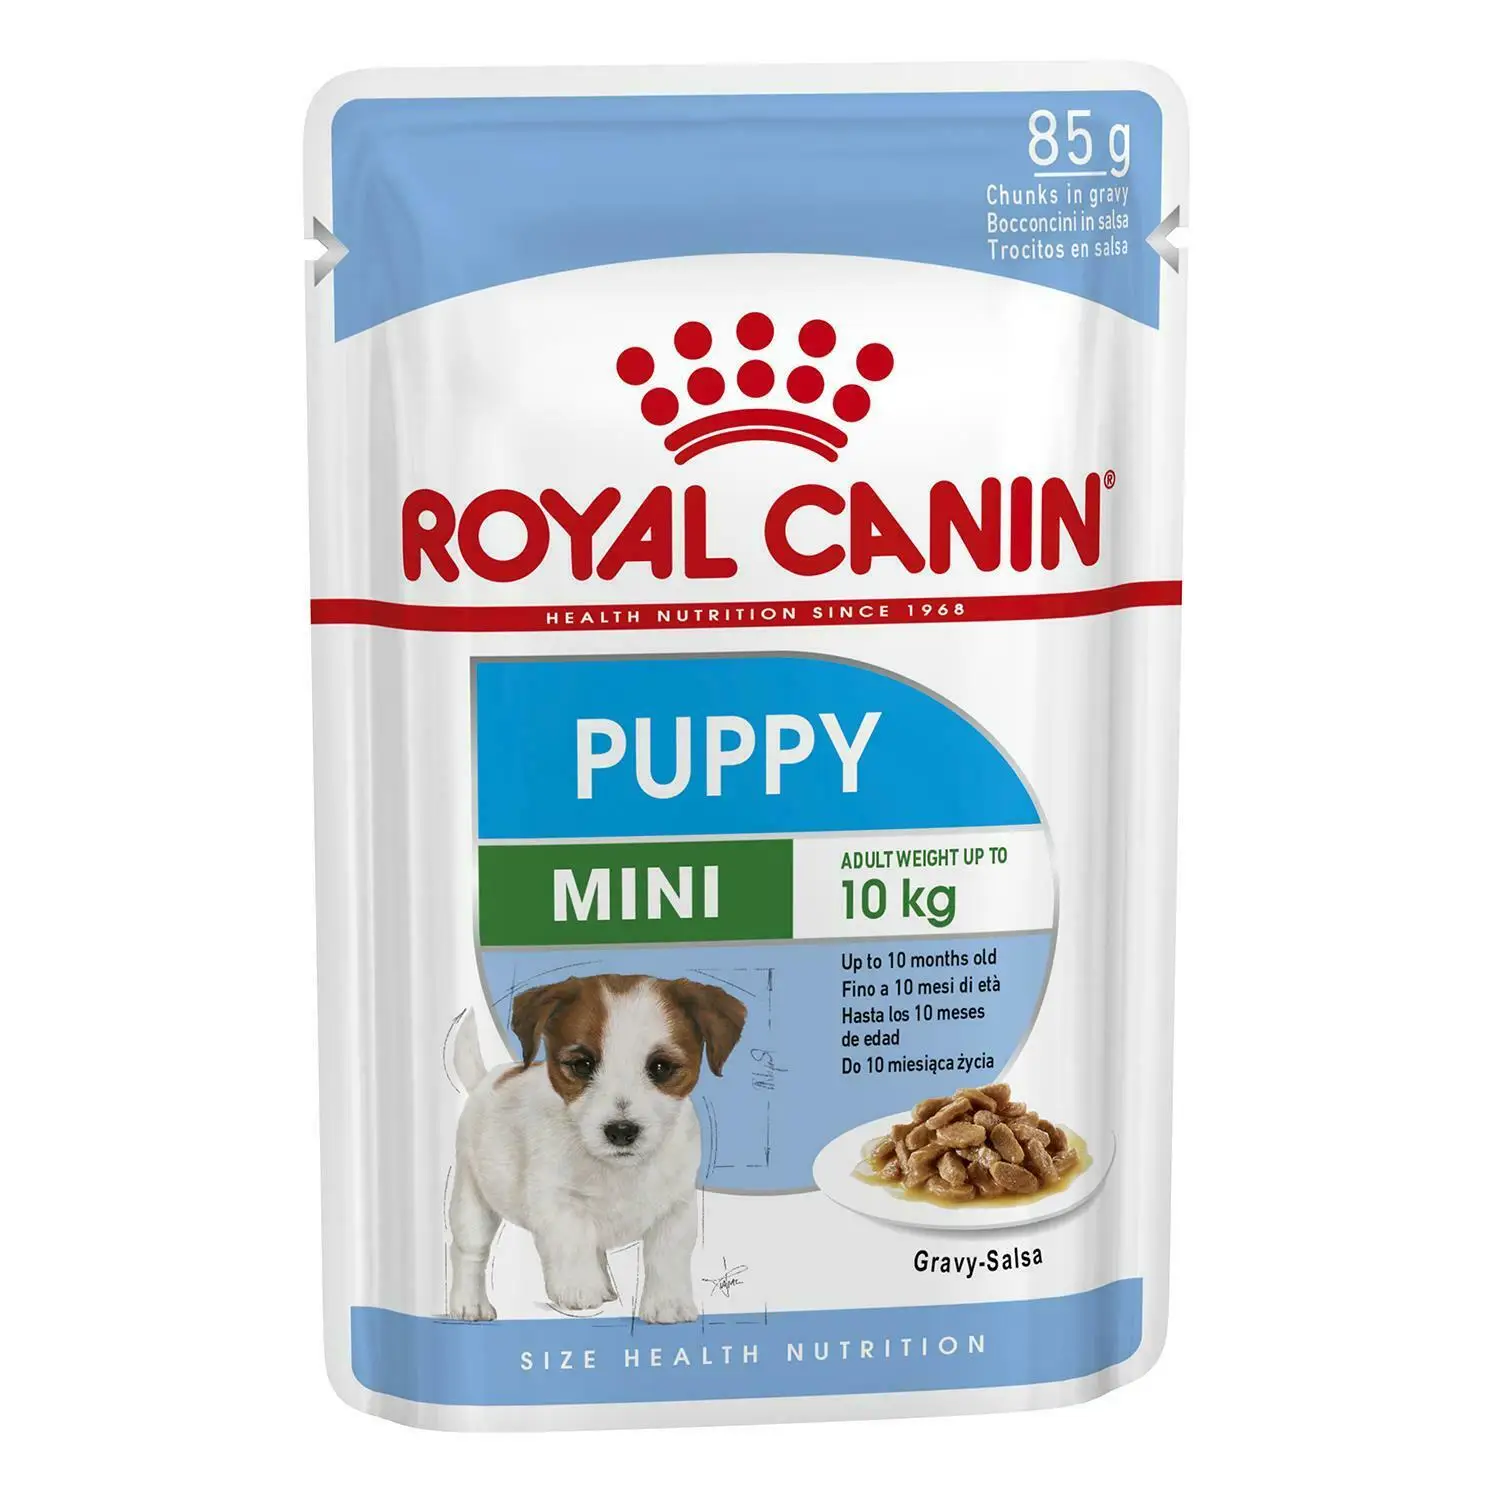 Royal Canin Indoor 27 Dry Cats Food / Royal Canin Indoor Adult 24 Dry Cats Food  / Royal Canin Giant Starter mother and baby dog